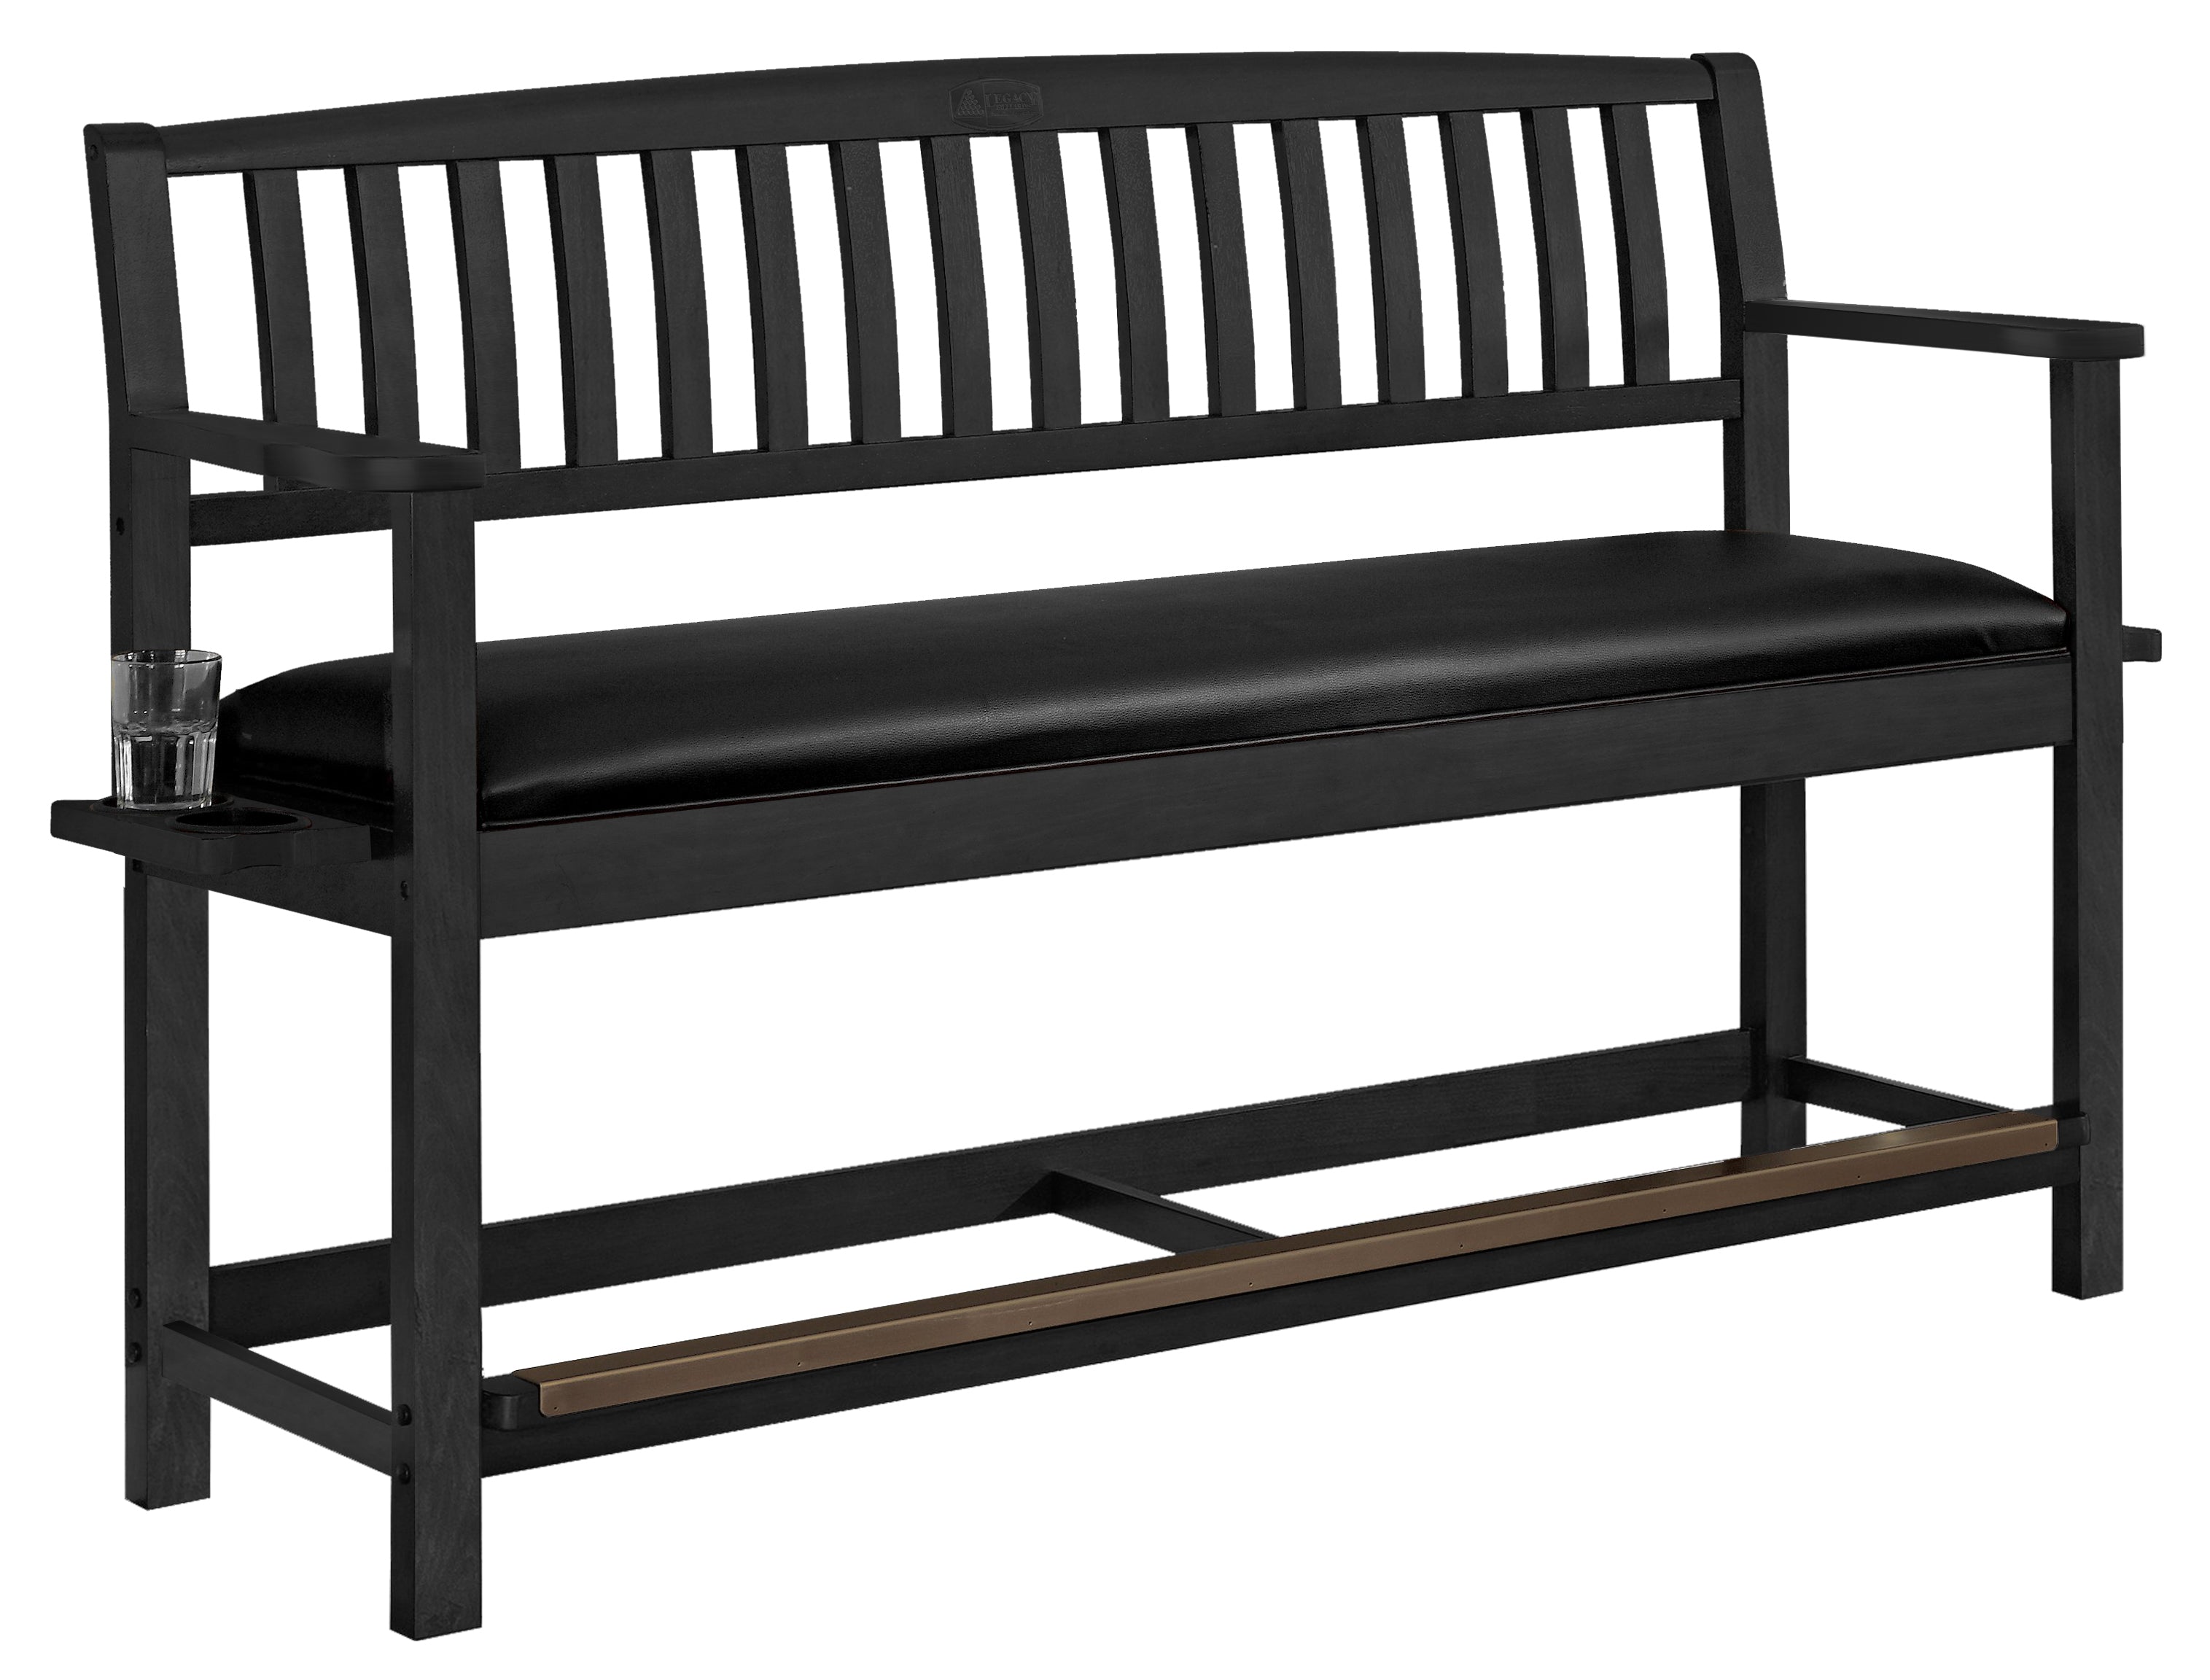 Legacy Billiards Classic Backed Storage Bench in Graphite Finish